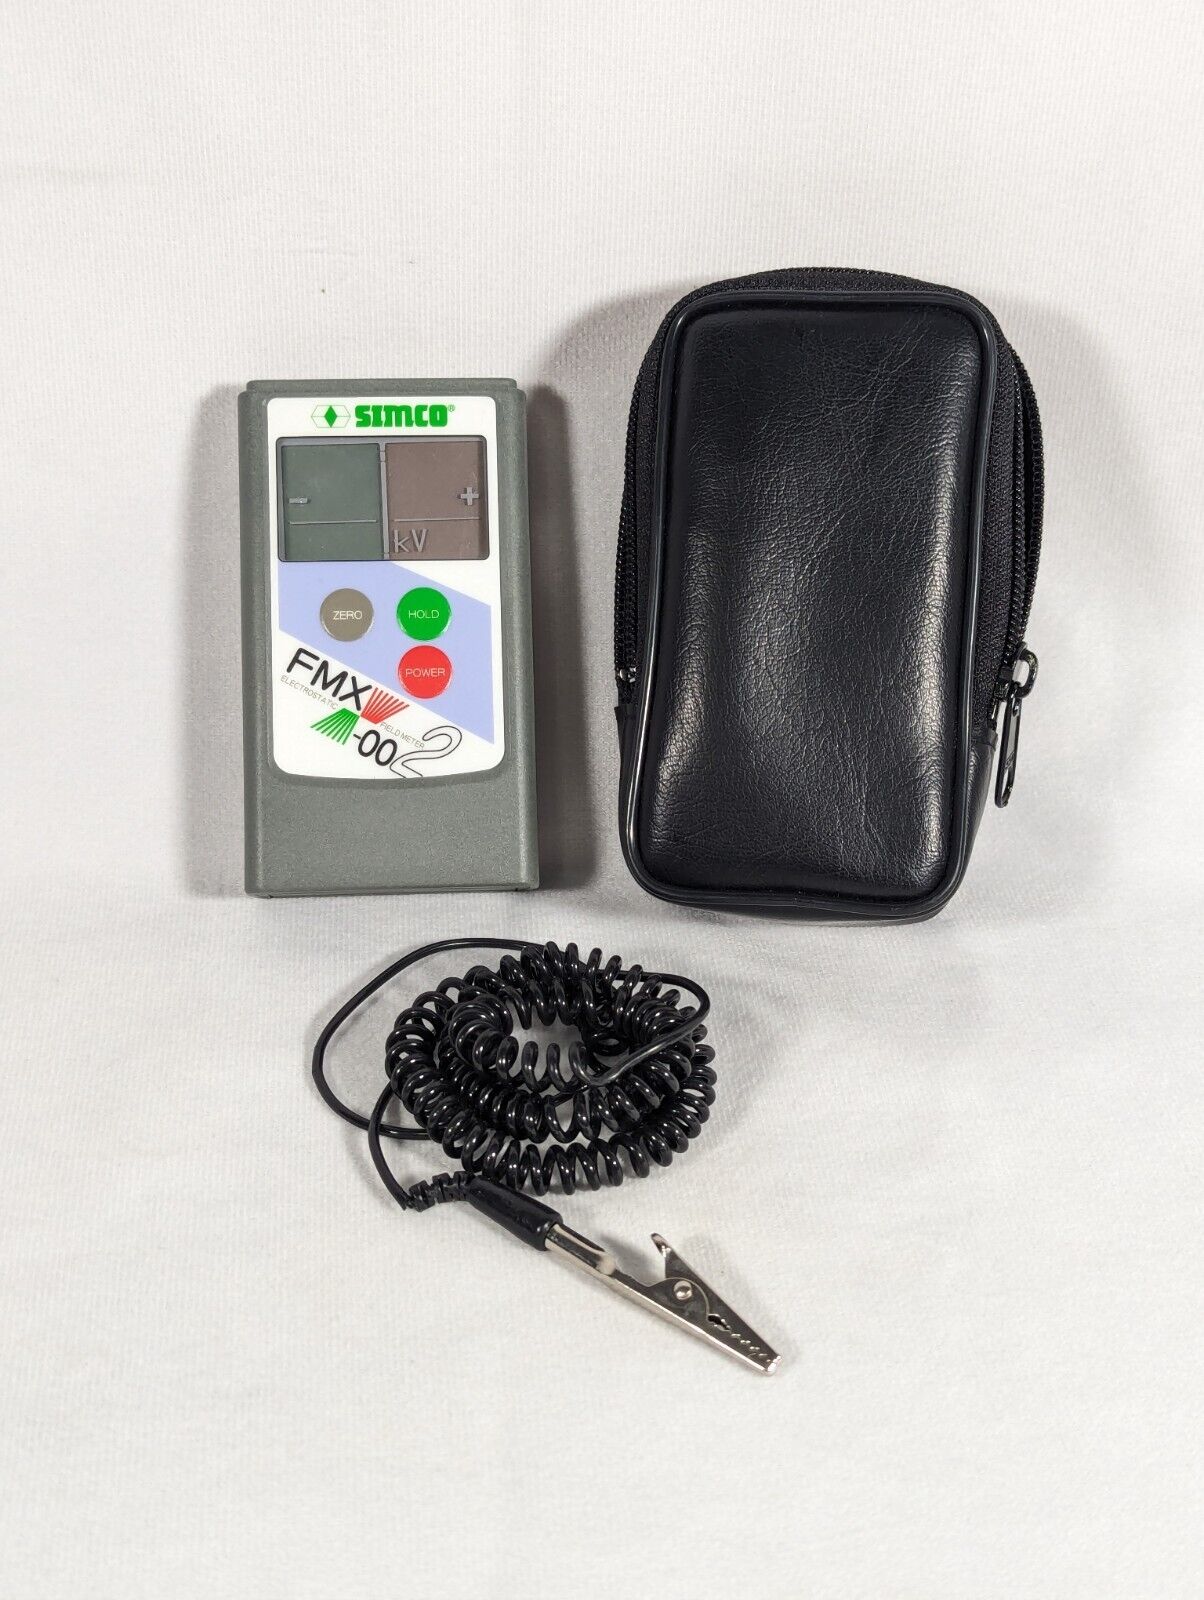 SIMCO Static Tester FMX-002  Electrostatic Field Meter Tested